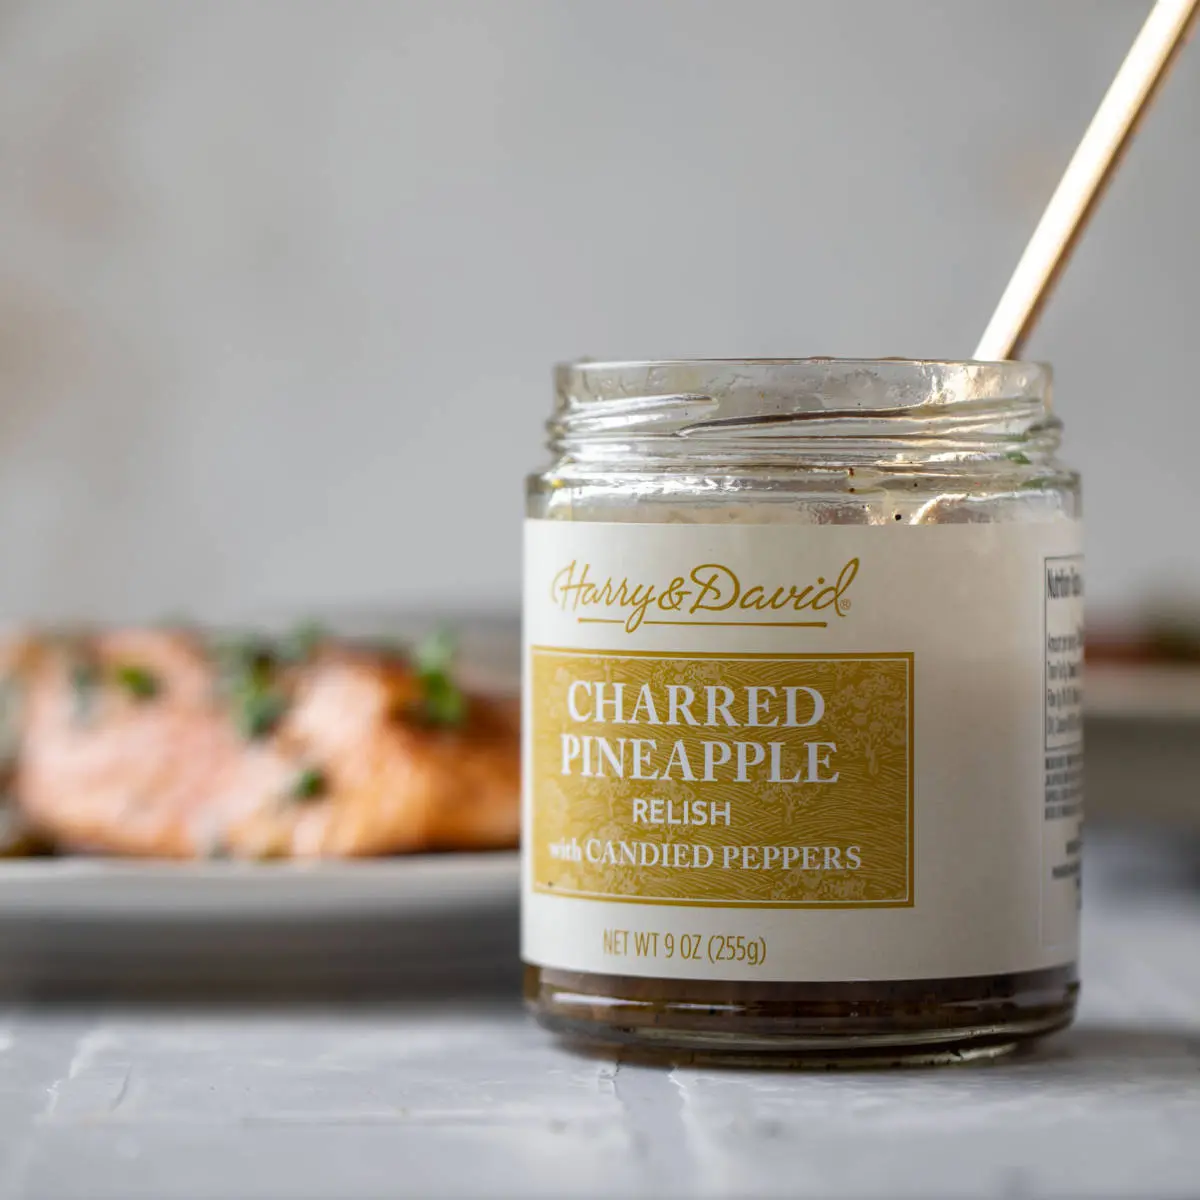 Jar of Harry & David's pineapple relish for grilled salmon recipe.